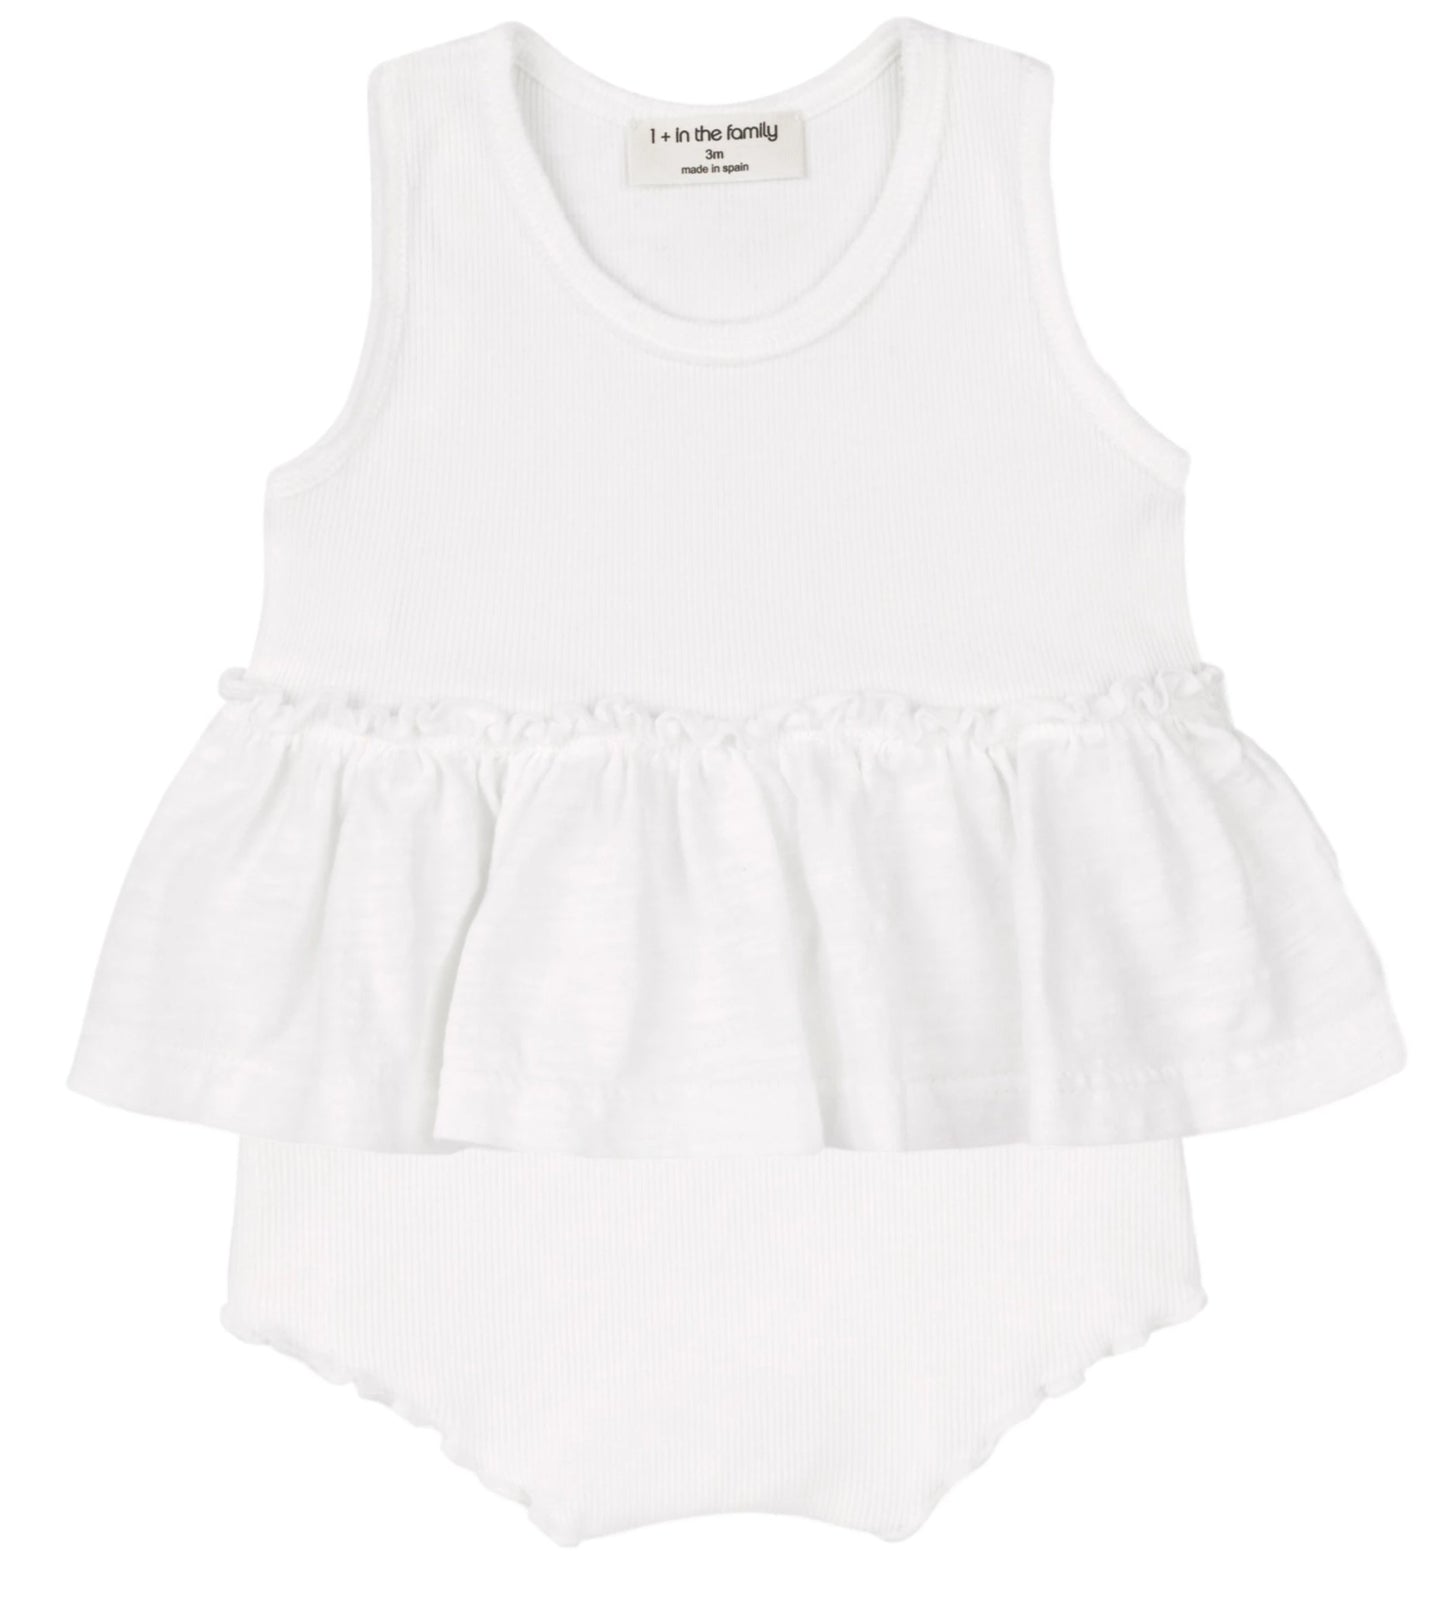 One + In the Family Baby Girl Leuca & Calais Outfit Set